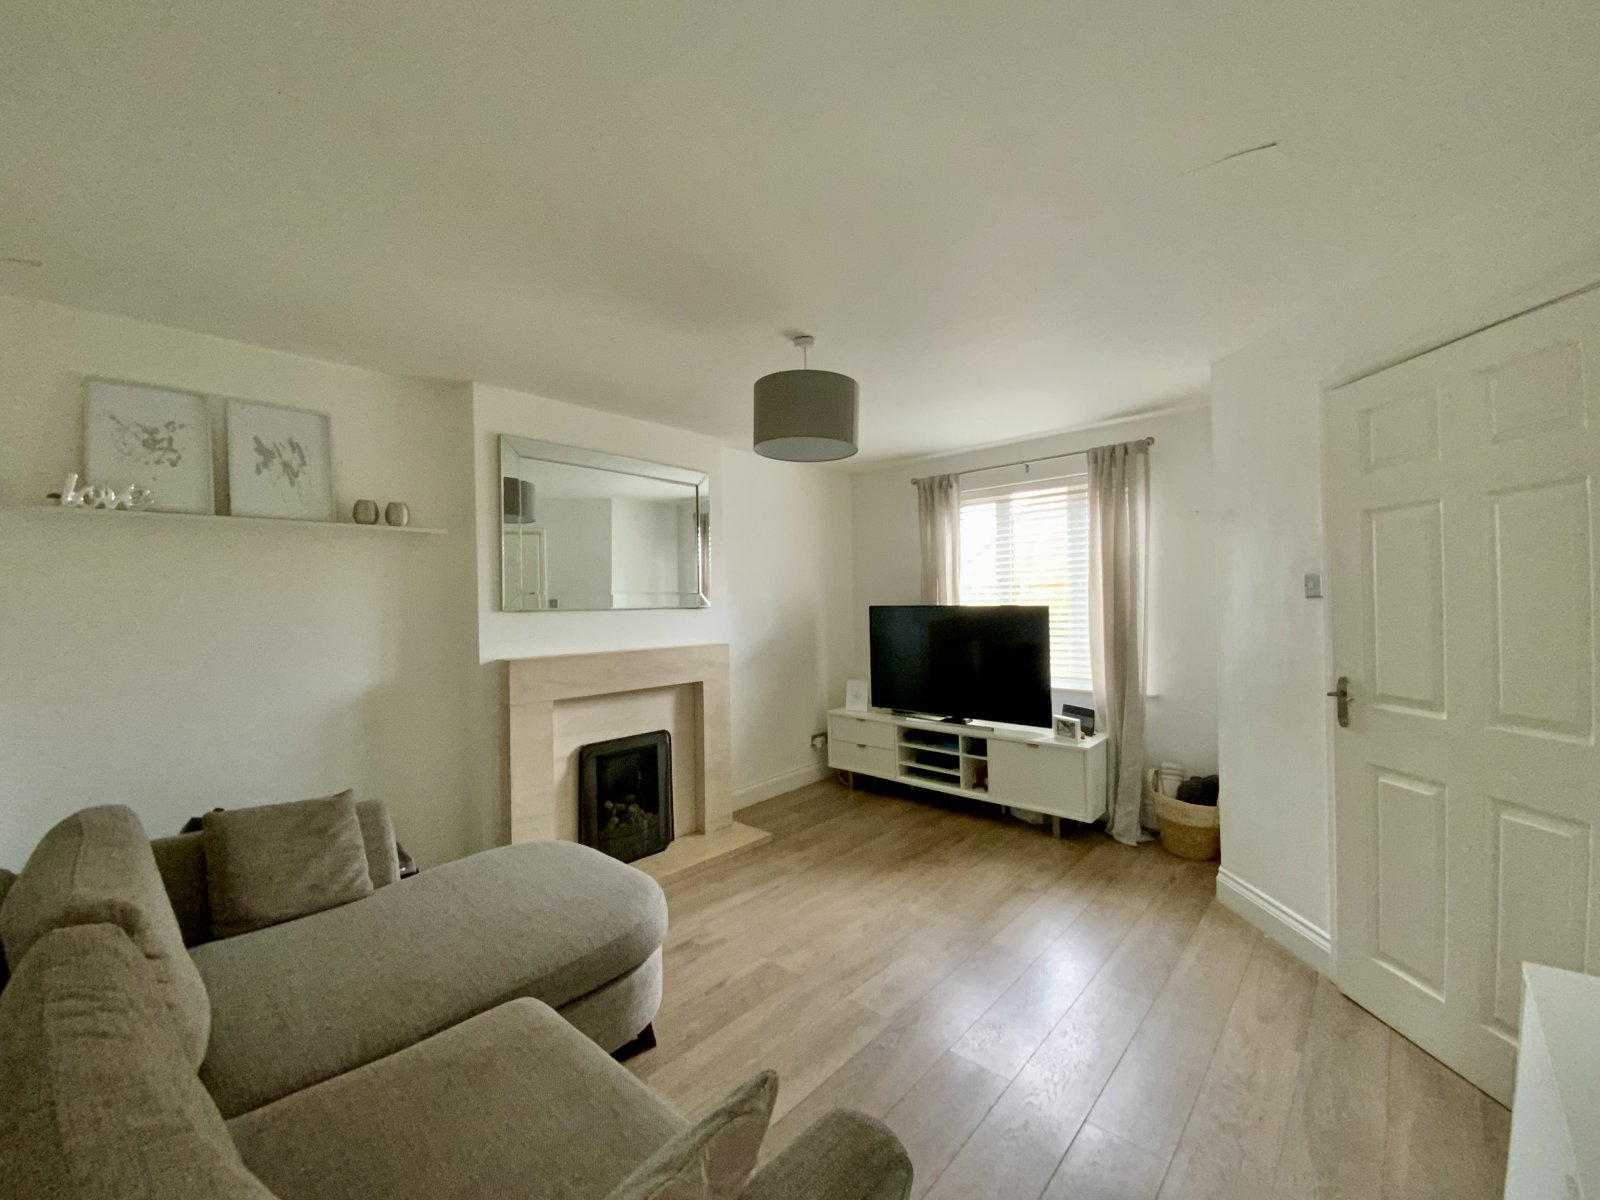 3 bed house for sale in Holystone Drive, Ingleby Barwick 1